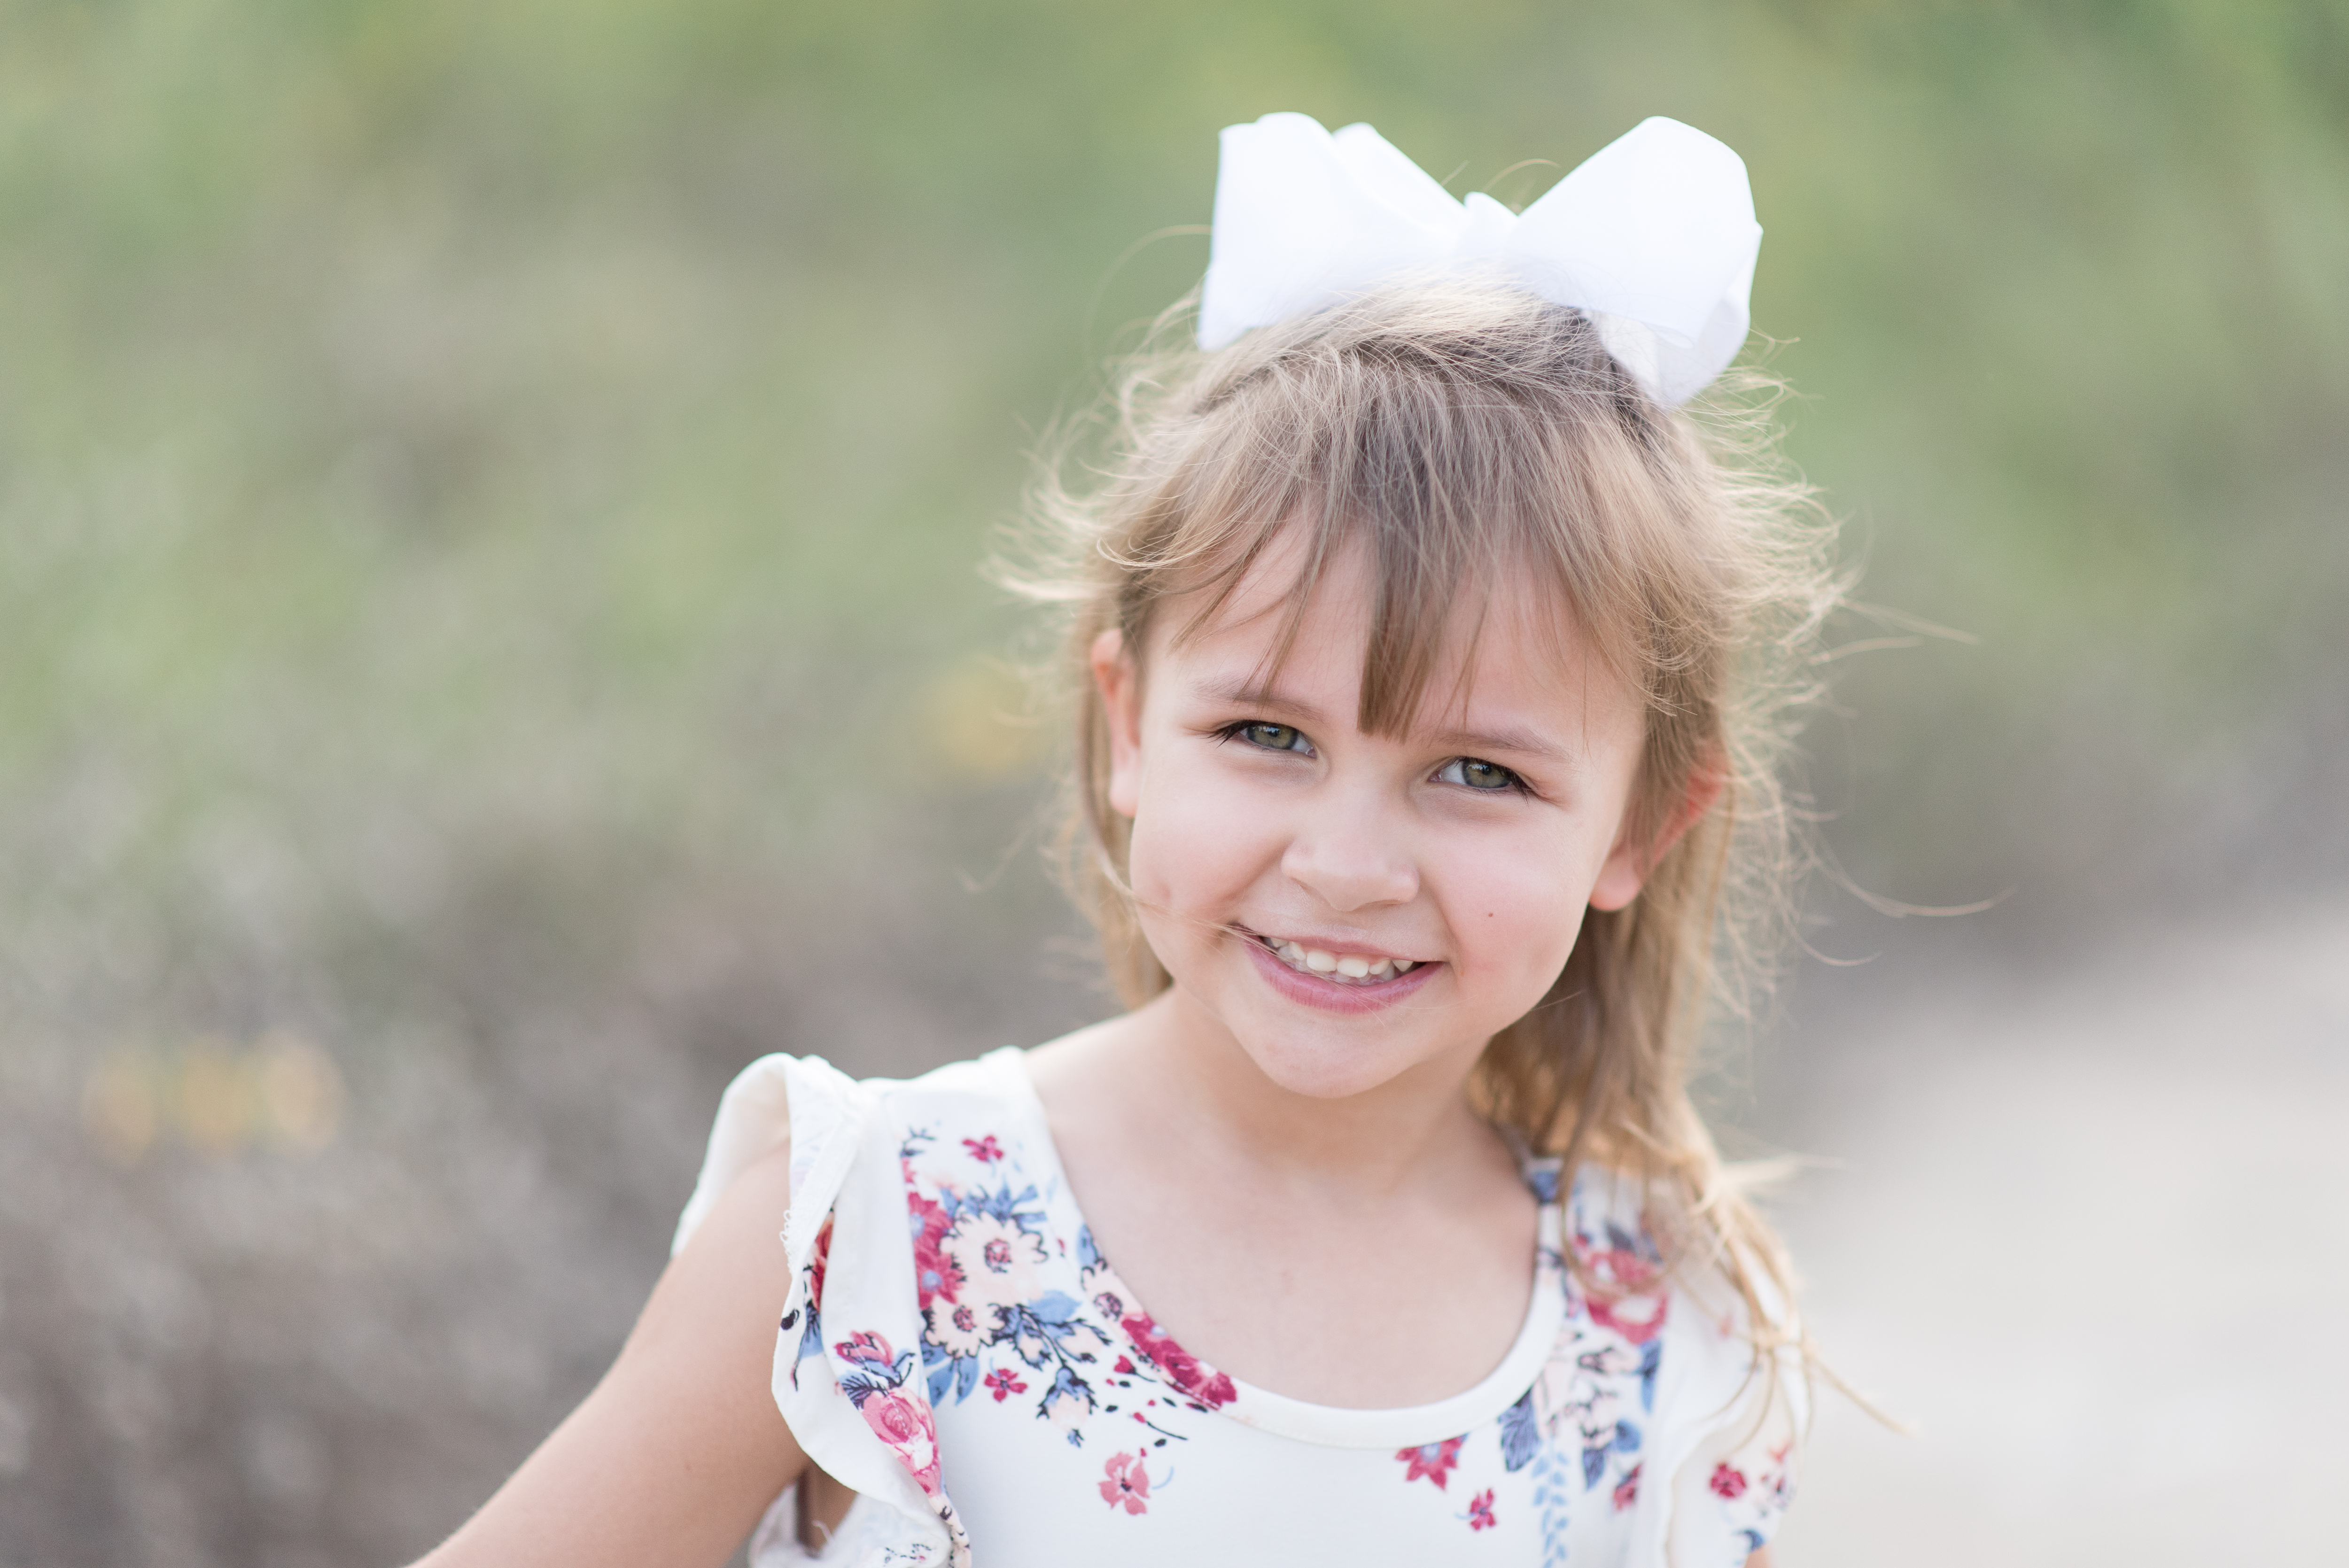 Kingwood Photographer's annual letter to her daughter for her 4th birthday